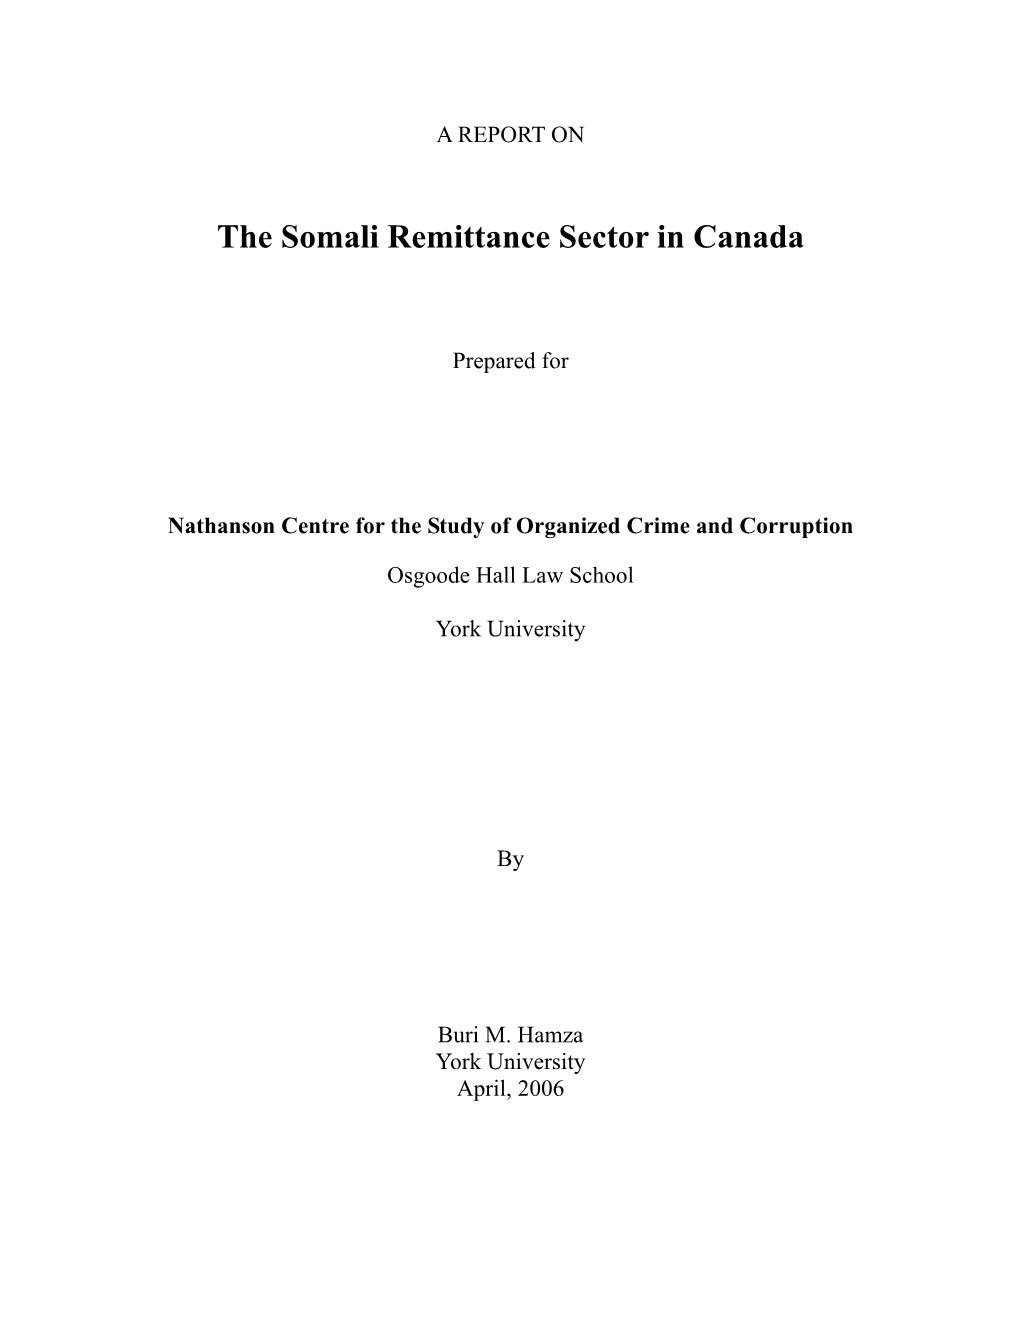 The Somali Remittance Sector in Canada